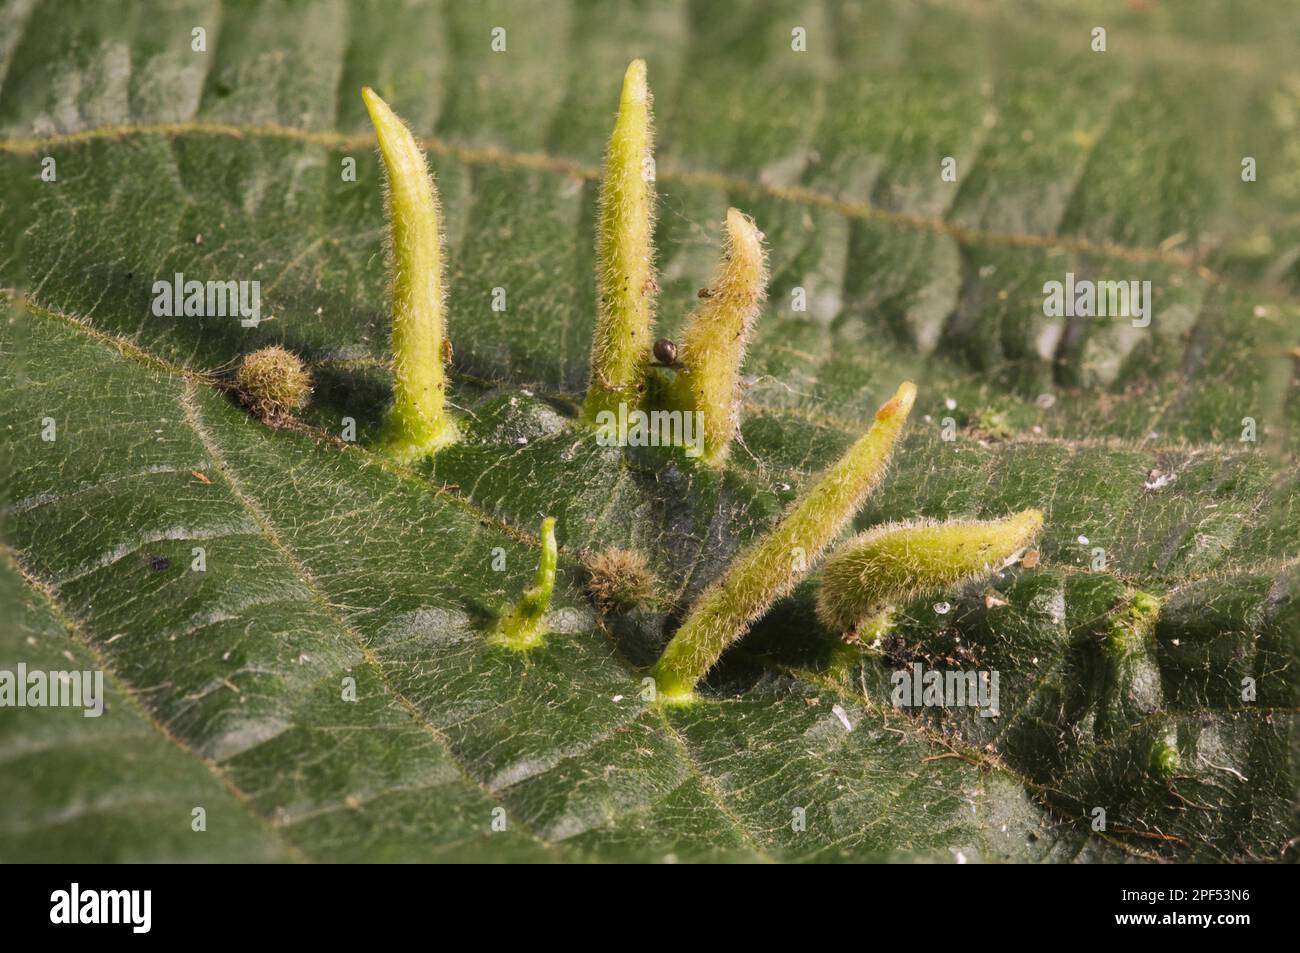 Lime Nail-gall Mite (Eriophyes tiliae) galls, growing from surface of Lime (Tilia sp.) leaf, Clumber Park, Nottinghamshire, England, United Kingdom Stock Photo